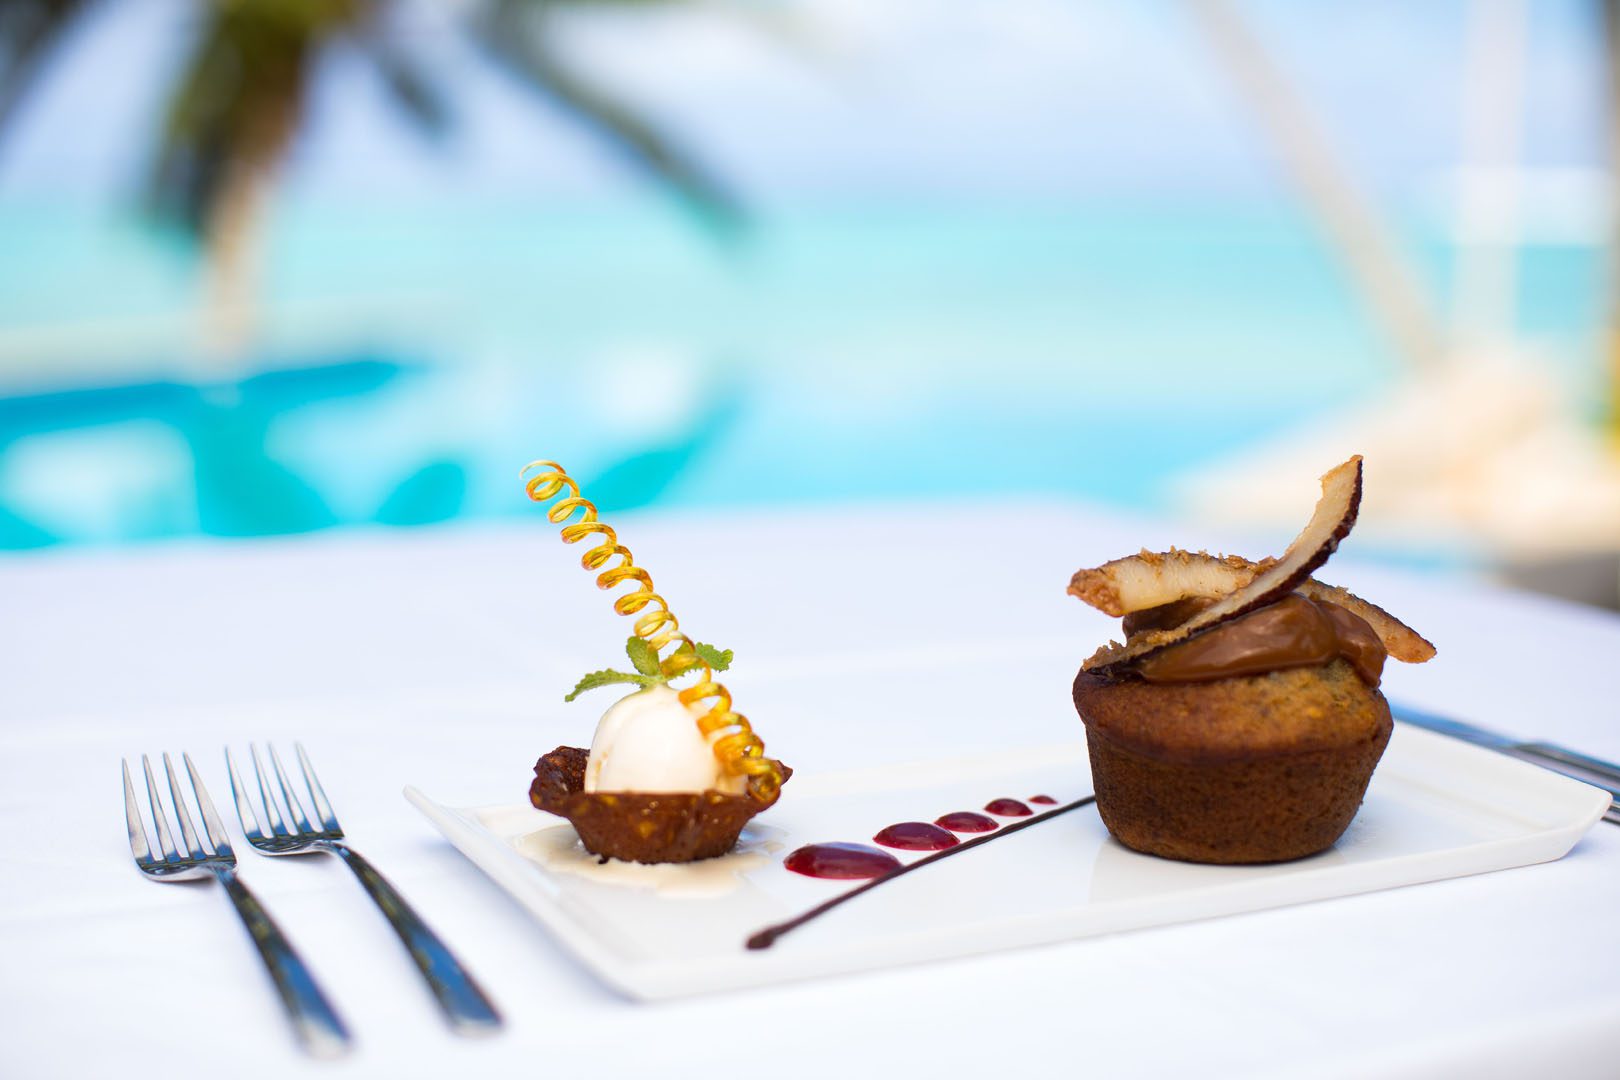 Delicious dessert meals by the pool